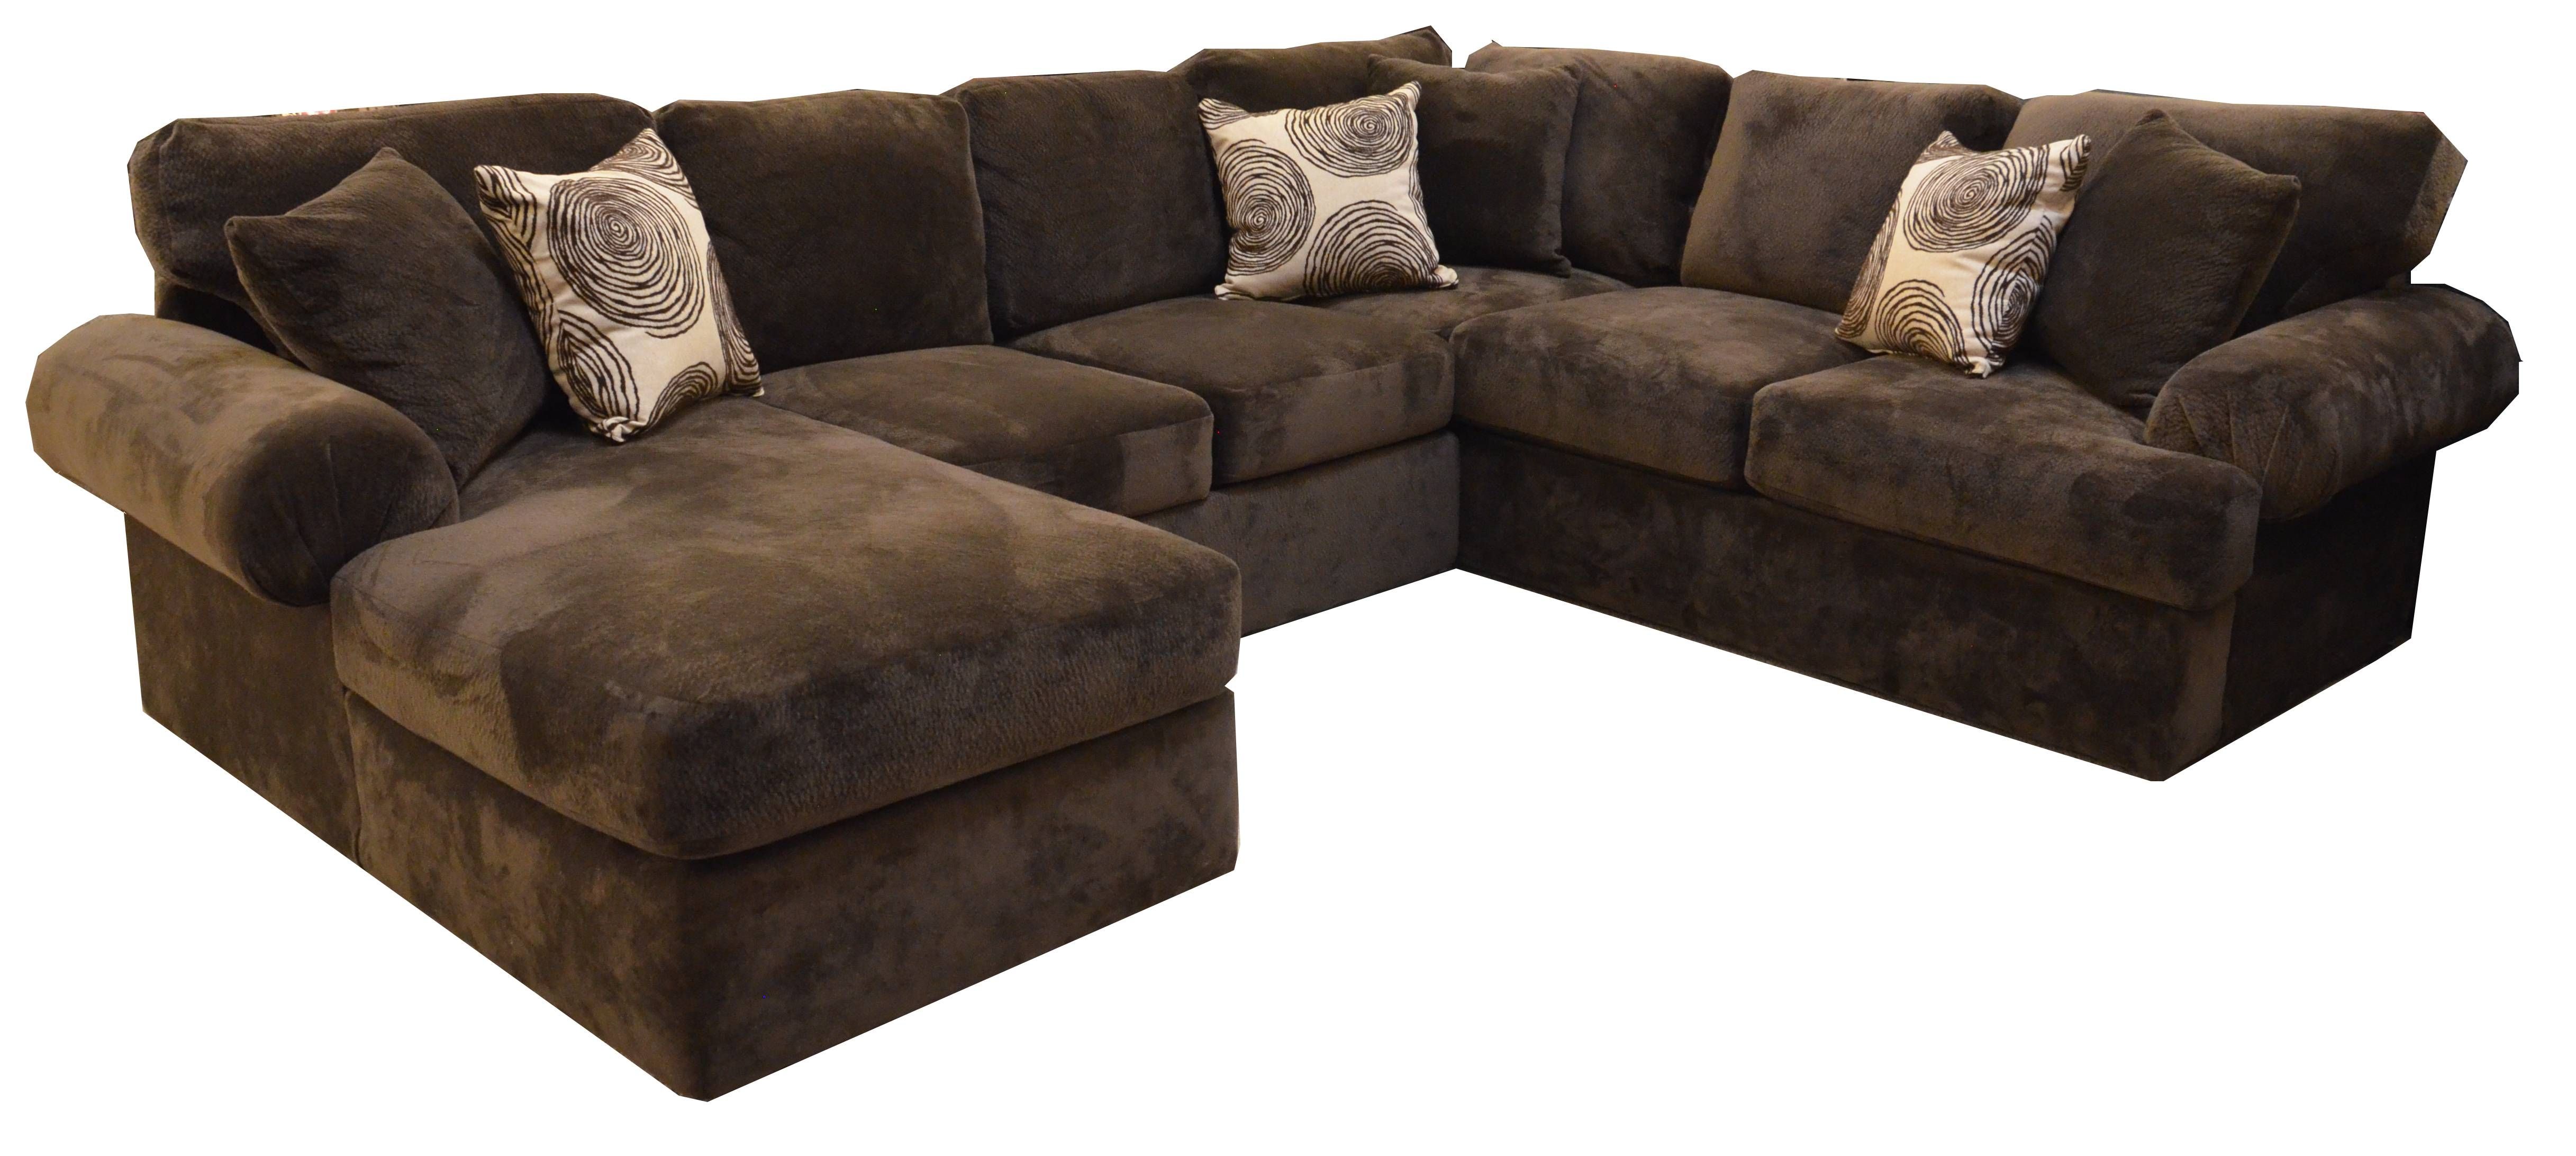 Sofas Center : Seat Sectional Sofa Phenomenal Image Ideas For 7 Seat Sectional Sofa (View 25 of 30)